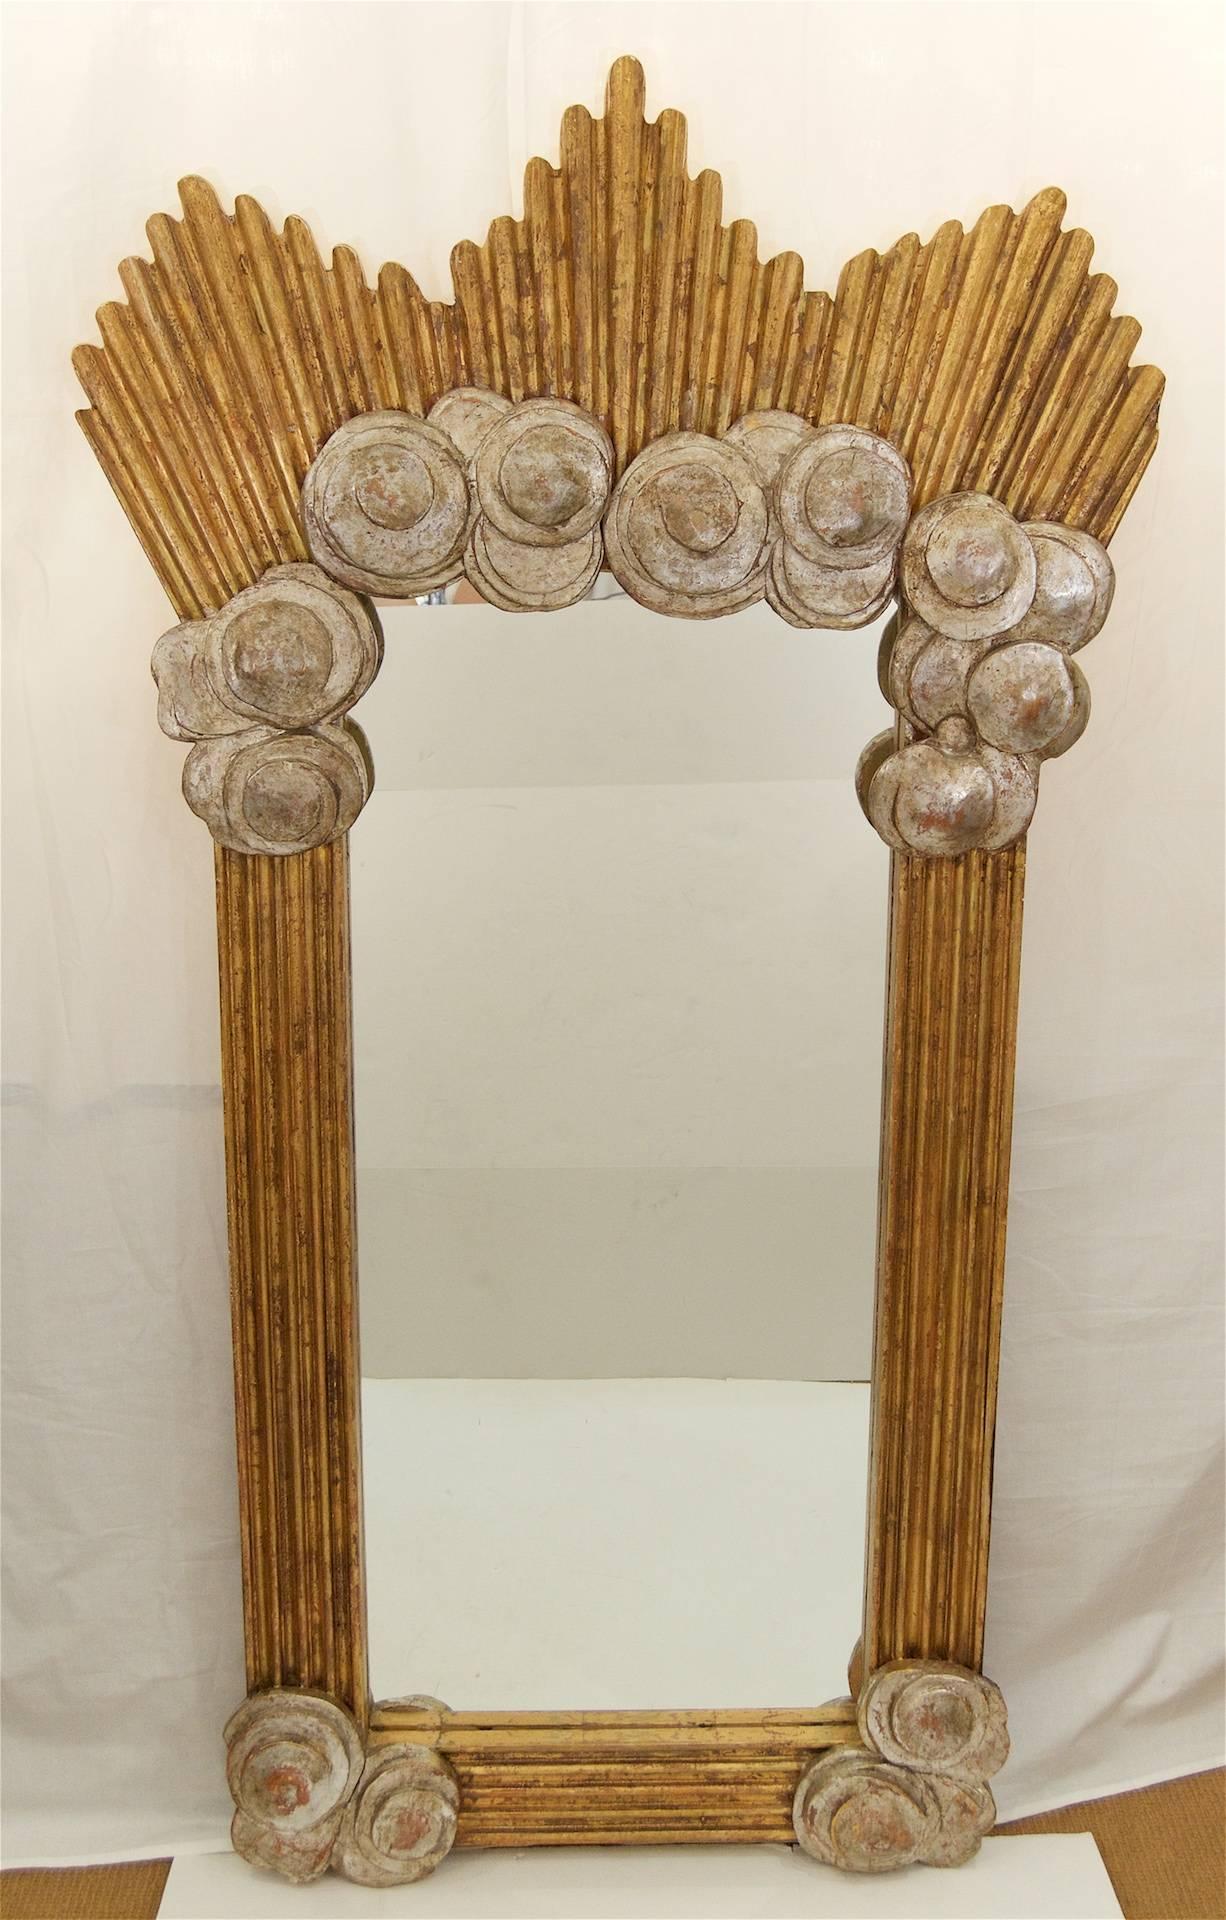 American Massive Silver and Gold Leafed Art Deco Style Mirror